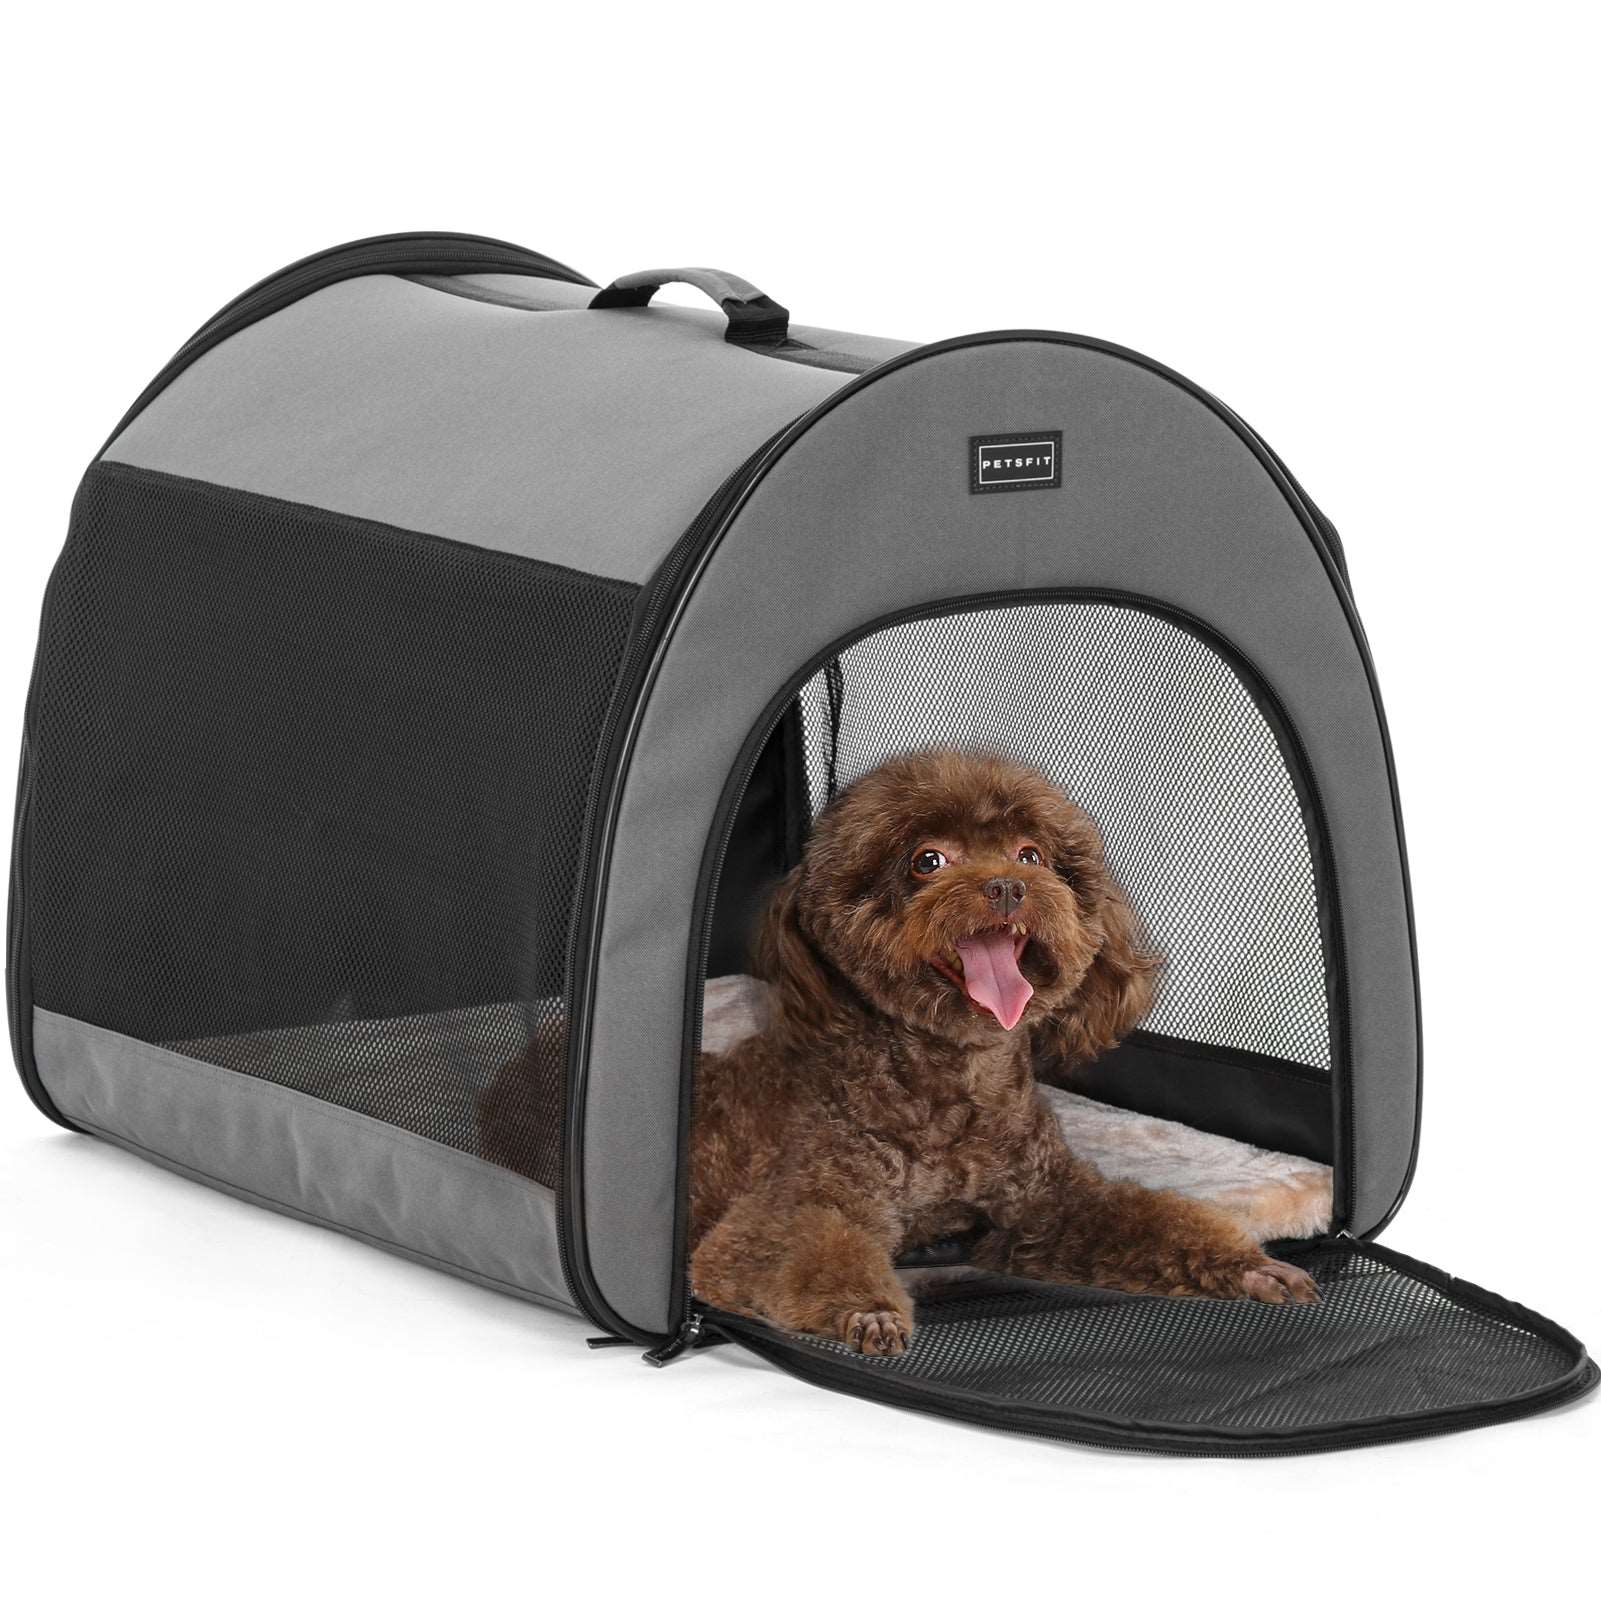 Petsfit-Arch-Design-Soft-Sided-Portable-Dog-Crate-02